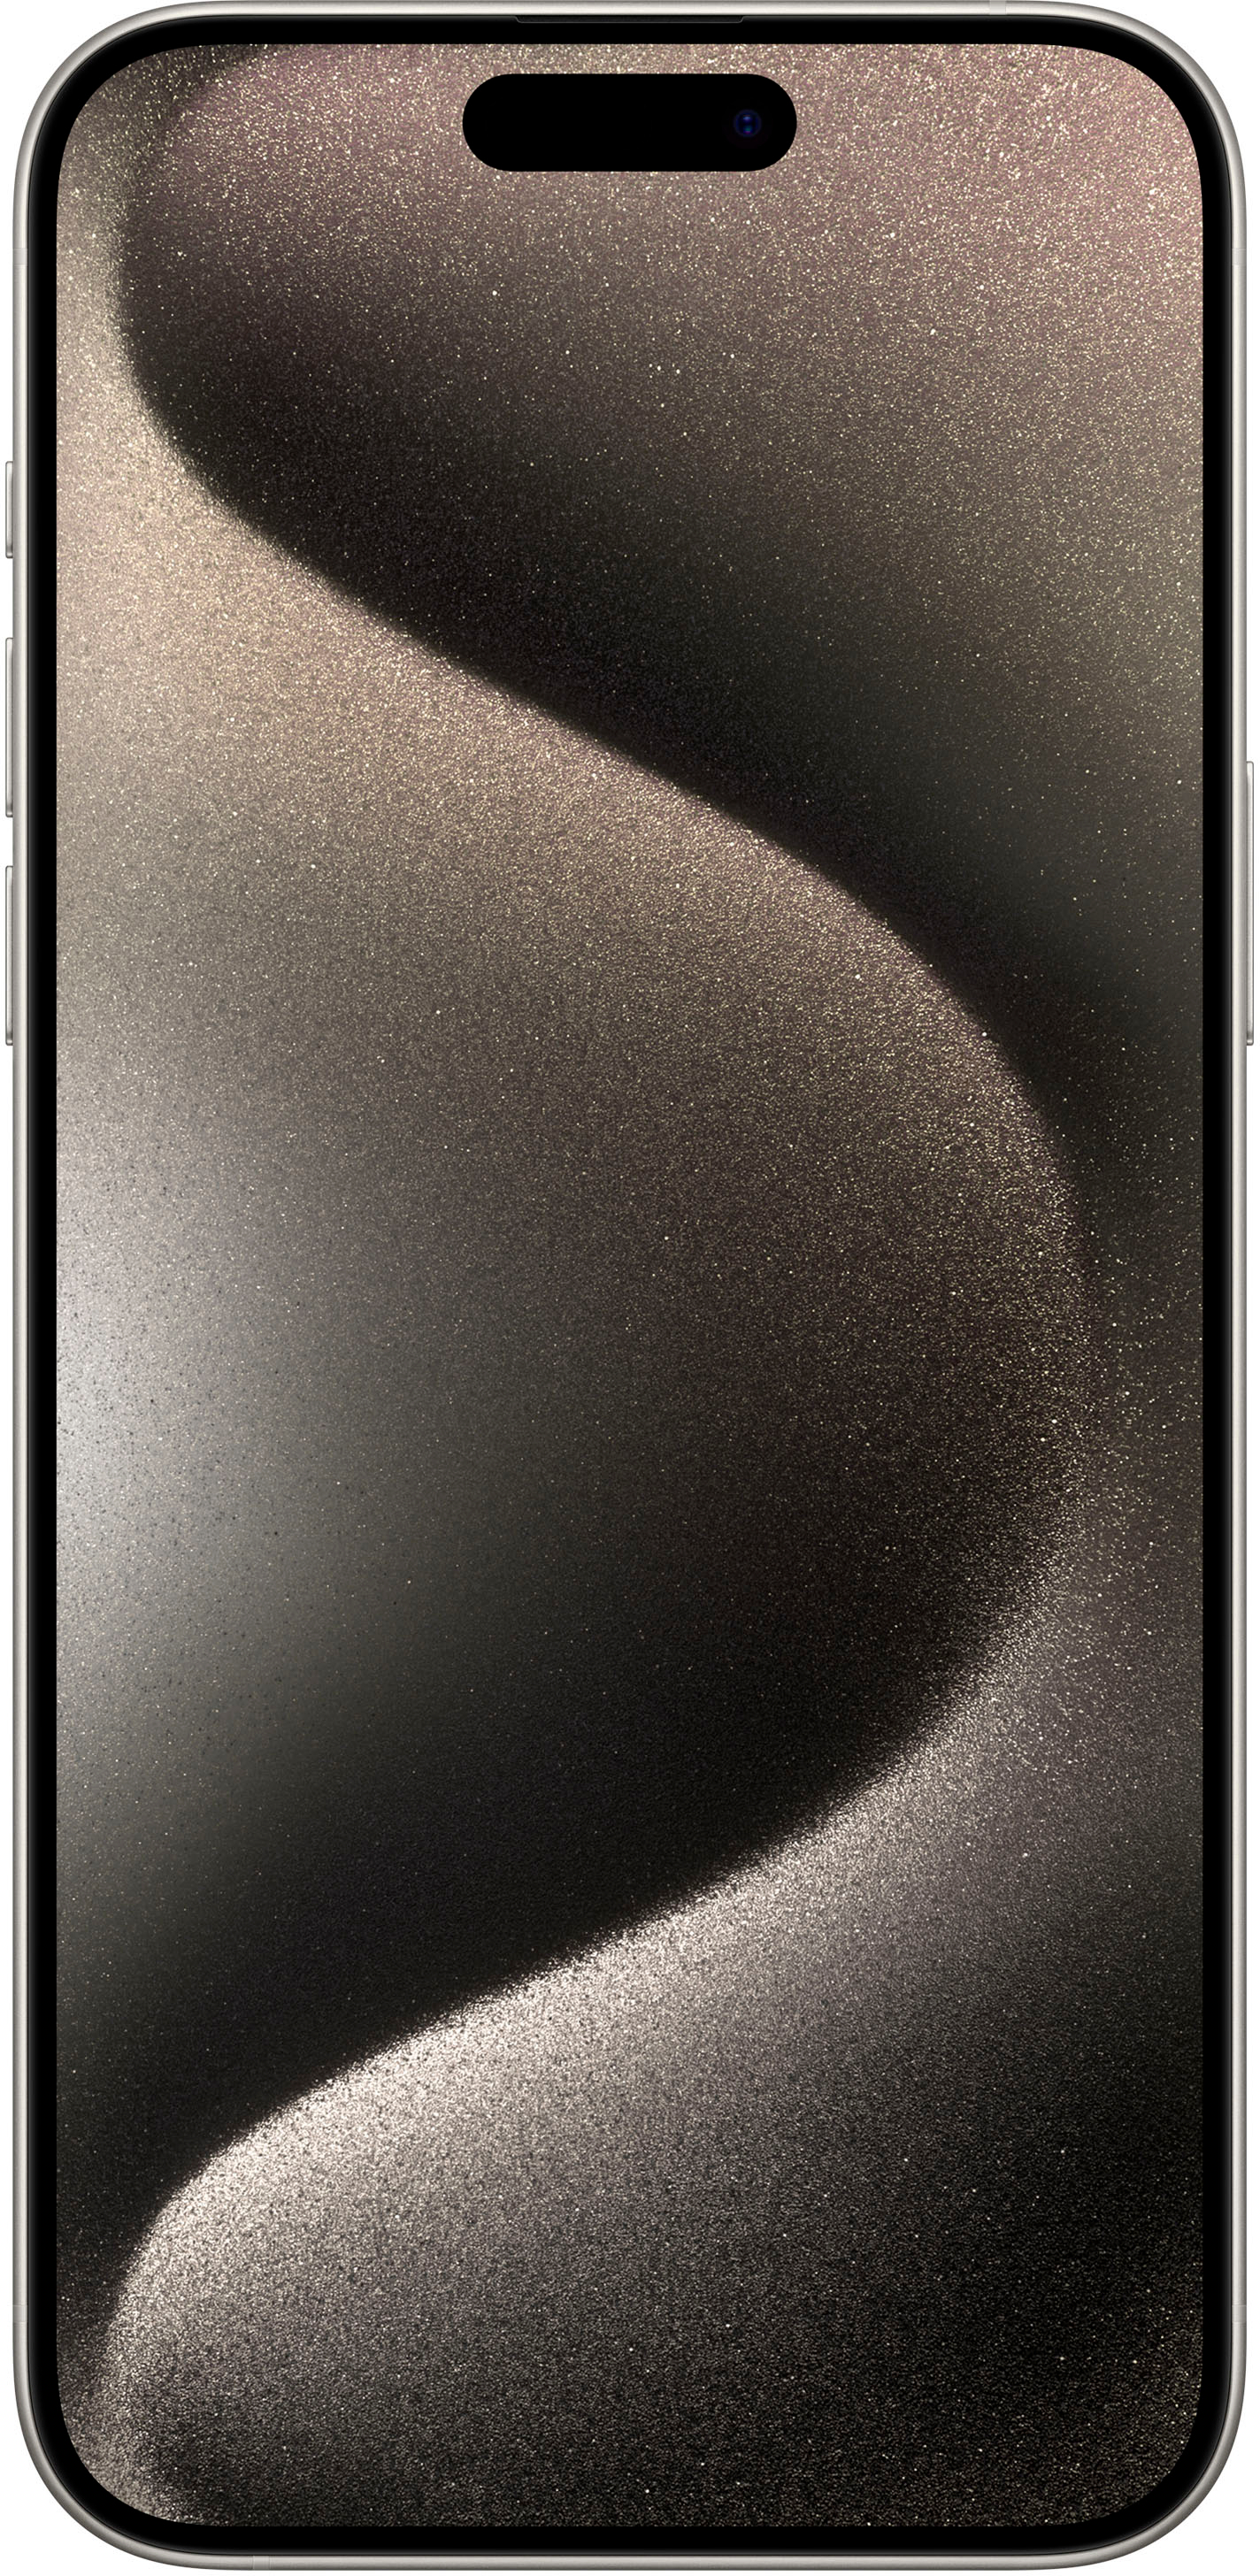 Apple iPhone 15 Pro Max 1TB Natural Titanium (AT&T) MU6H3LL/A - Best Buy | alle Smartphones